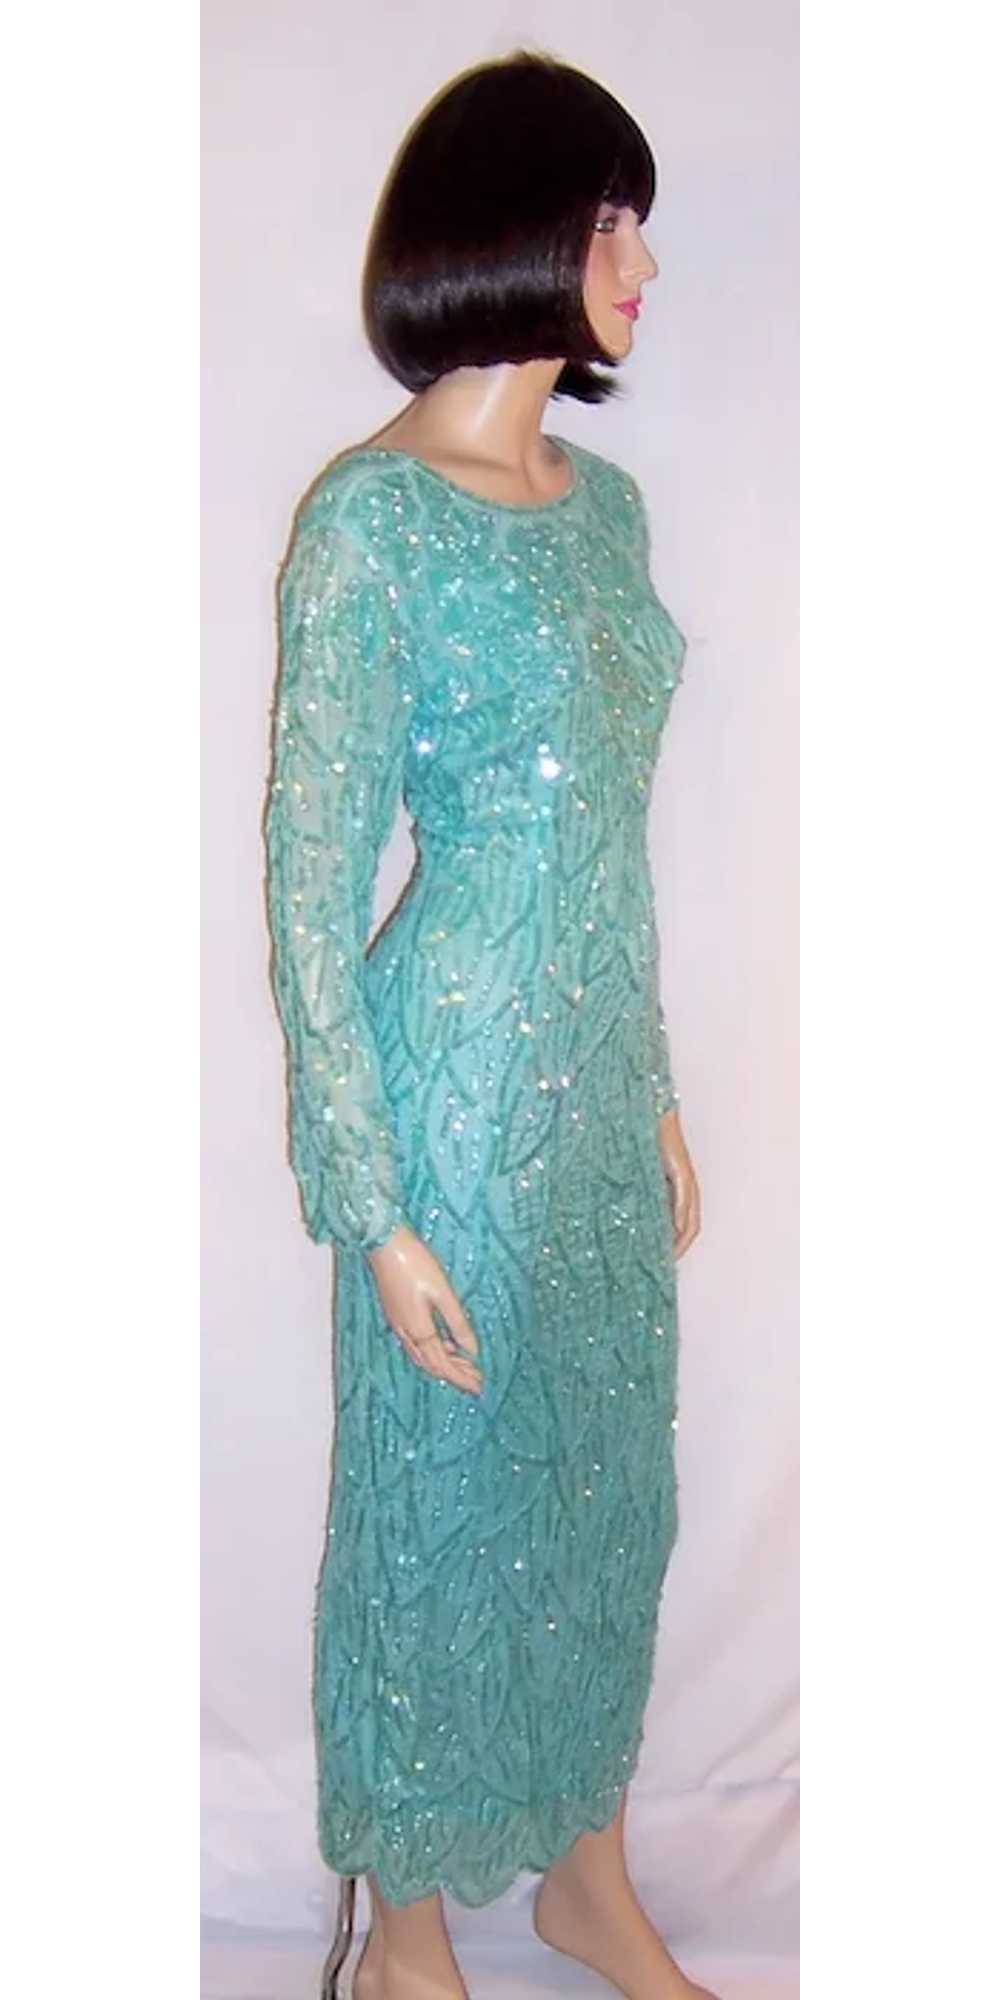 Pale Turquoise Sequined and Beaded Gown - image 2